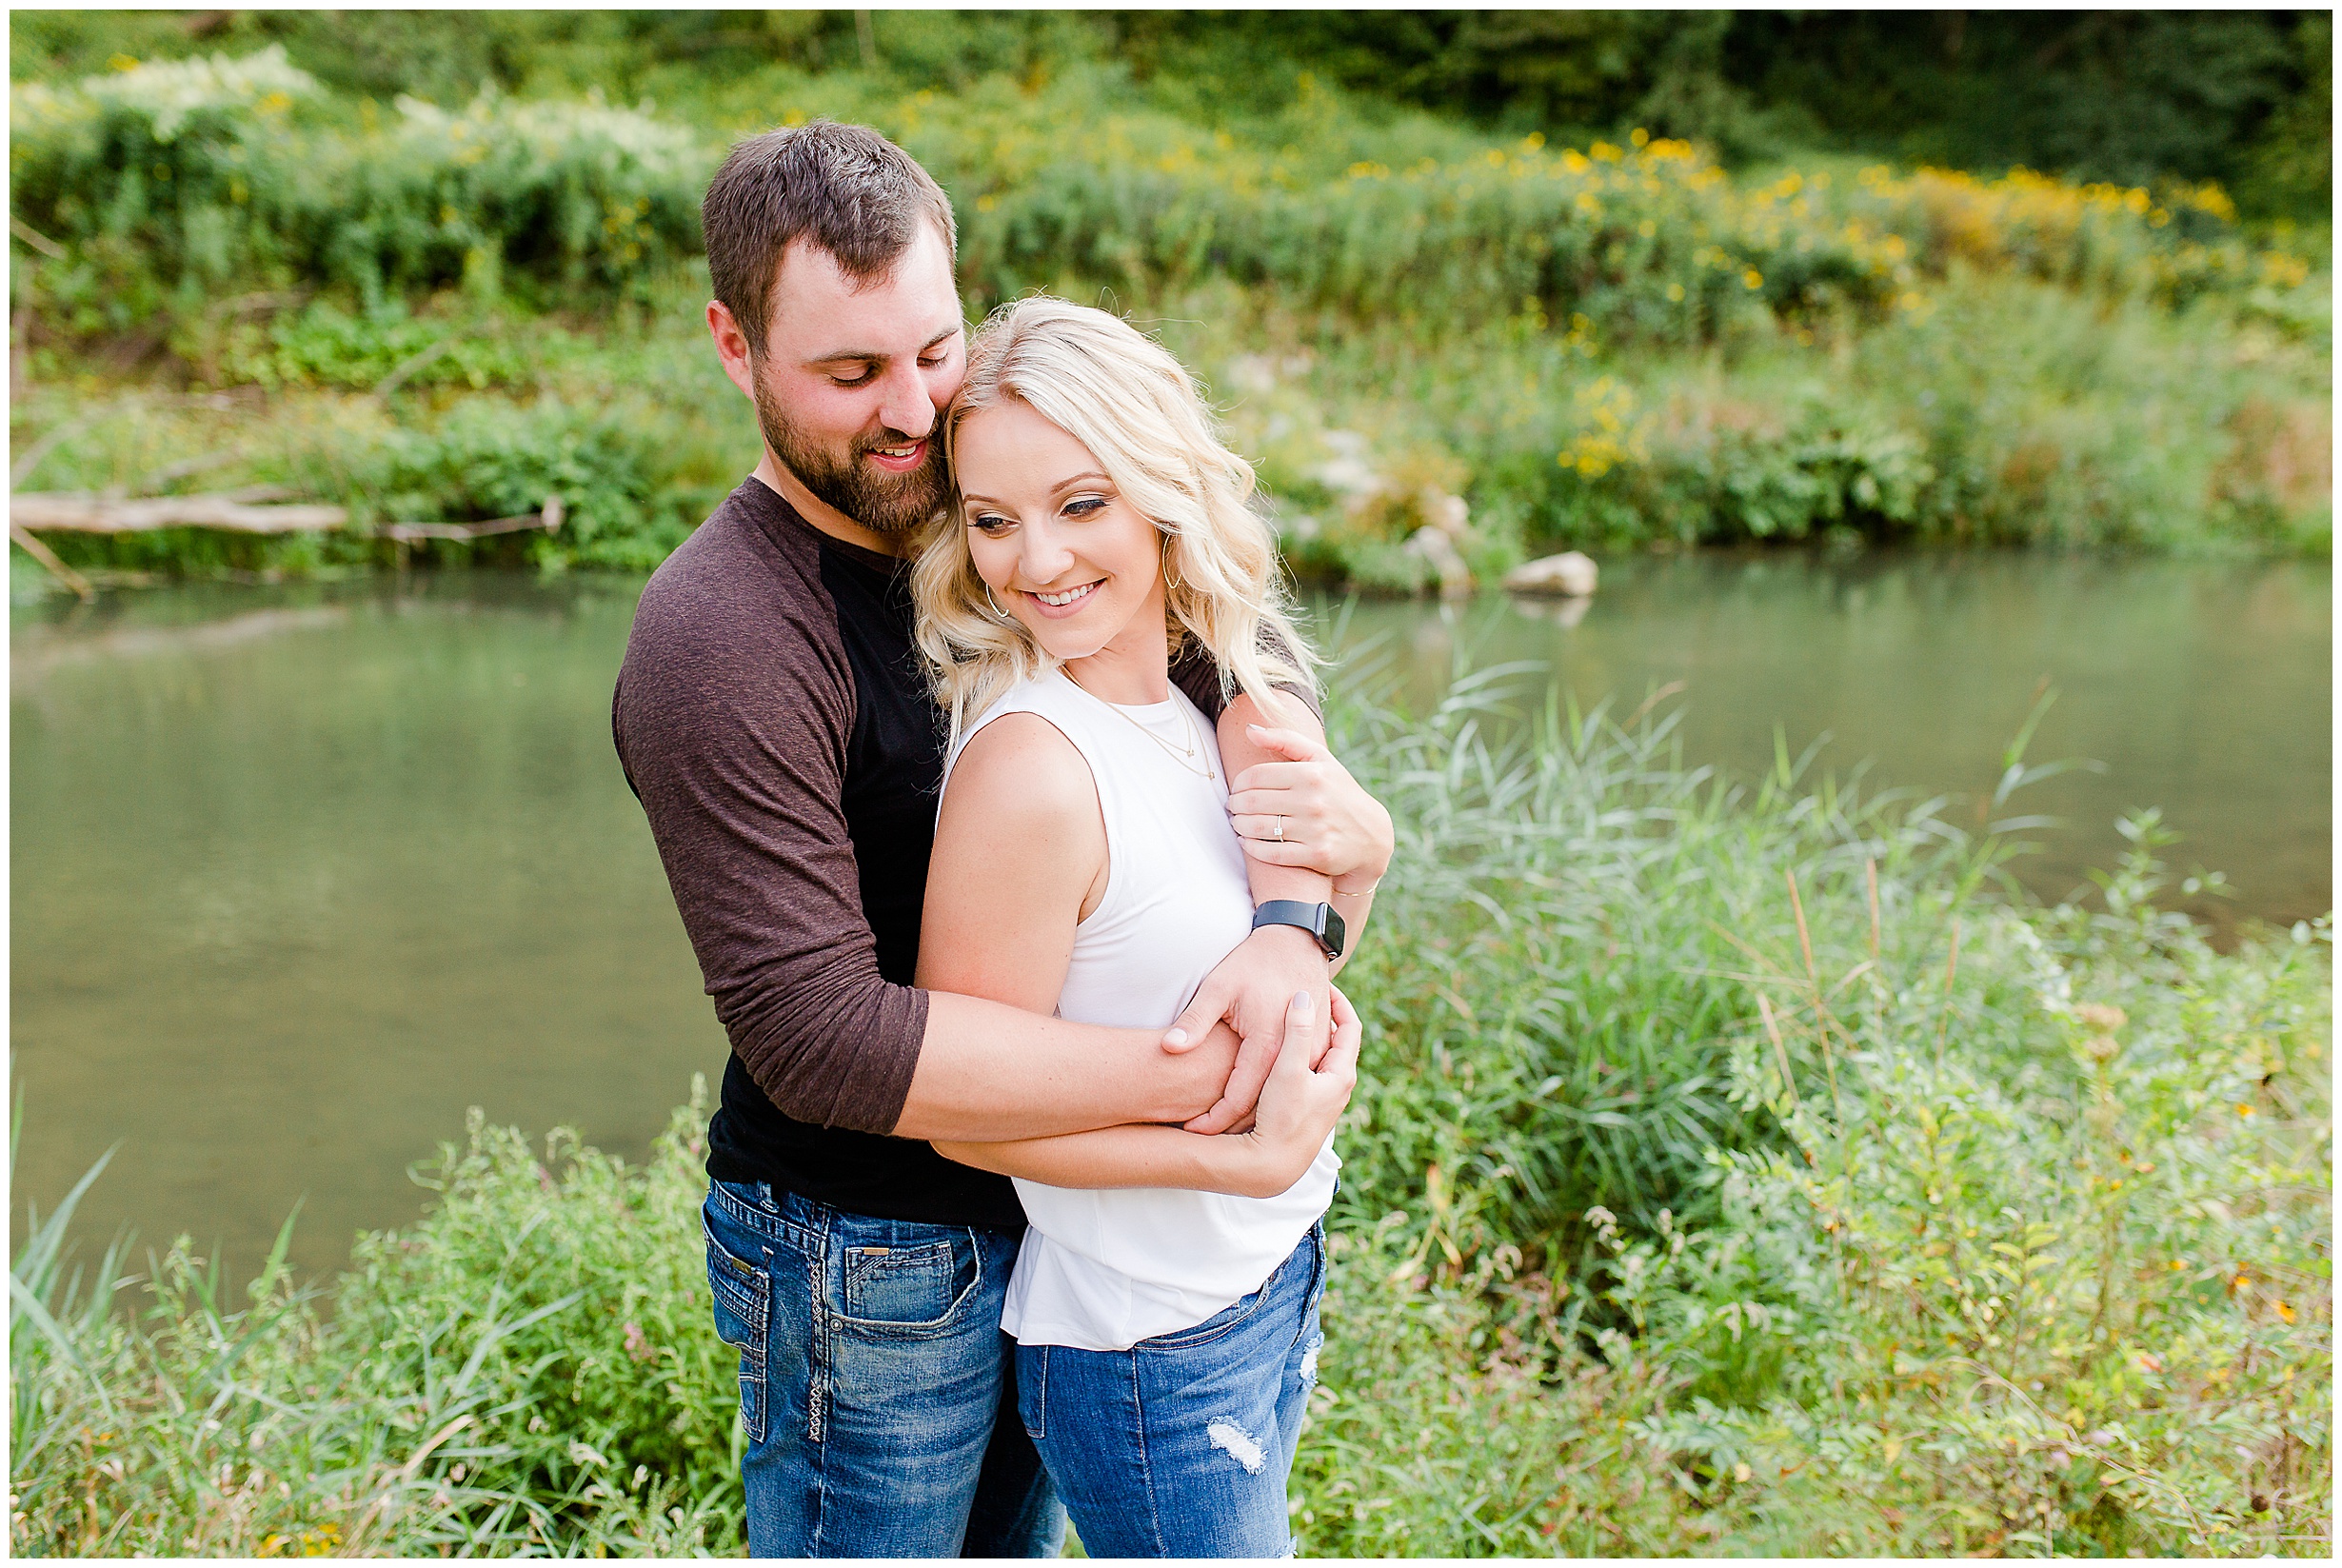 Yellow River Forest Engagement Session | Megan Snitker Photo-4.jpg